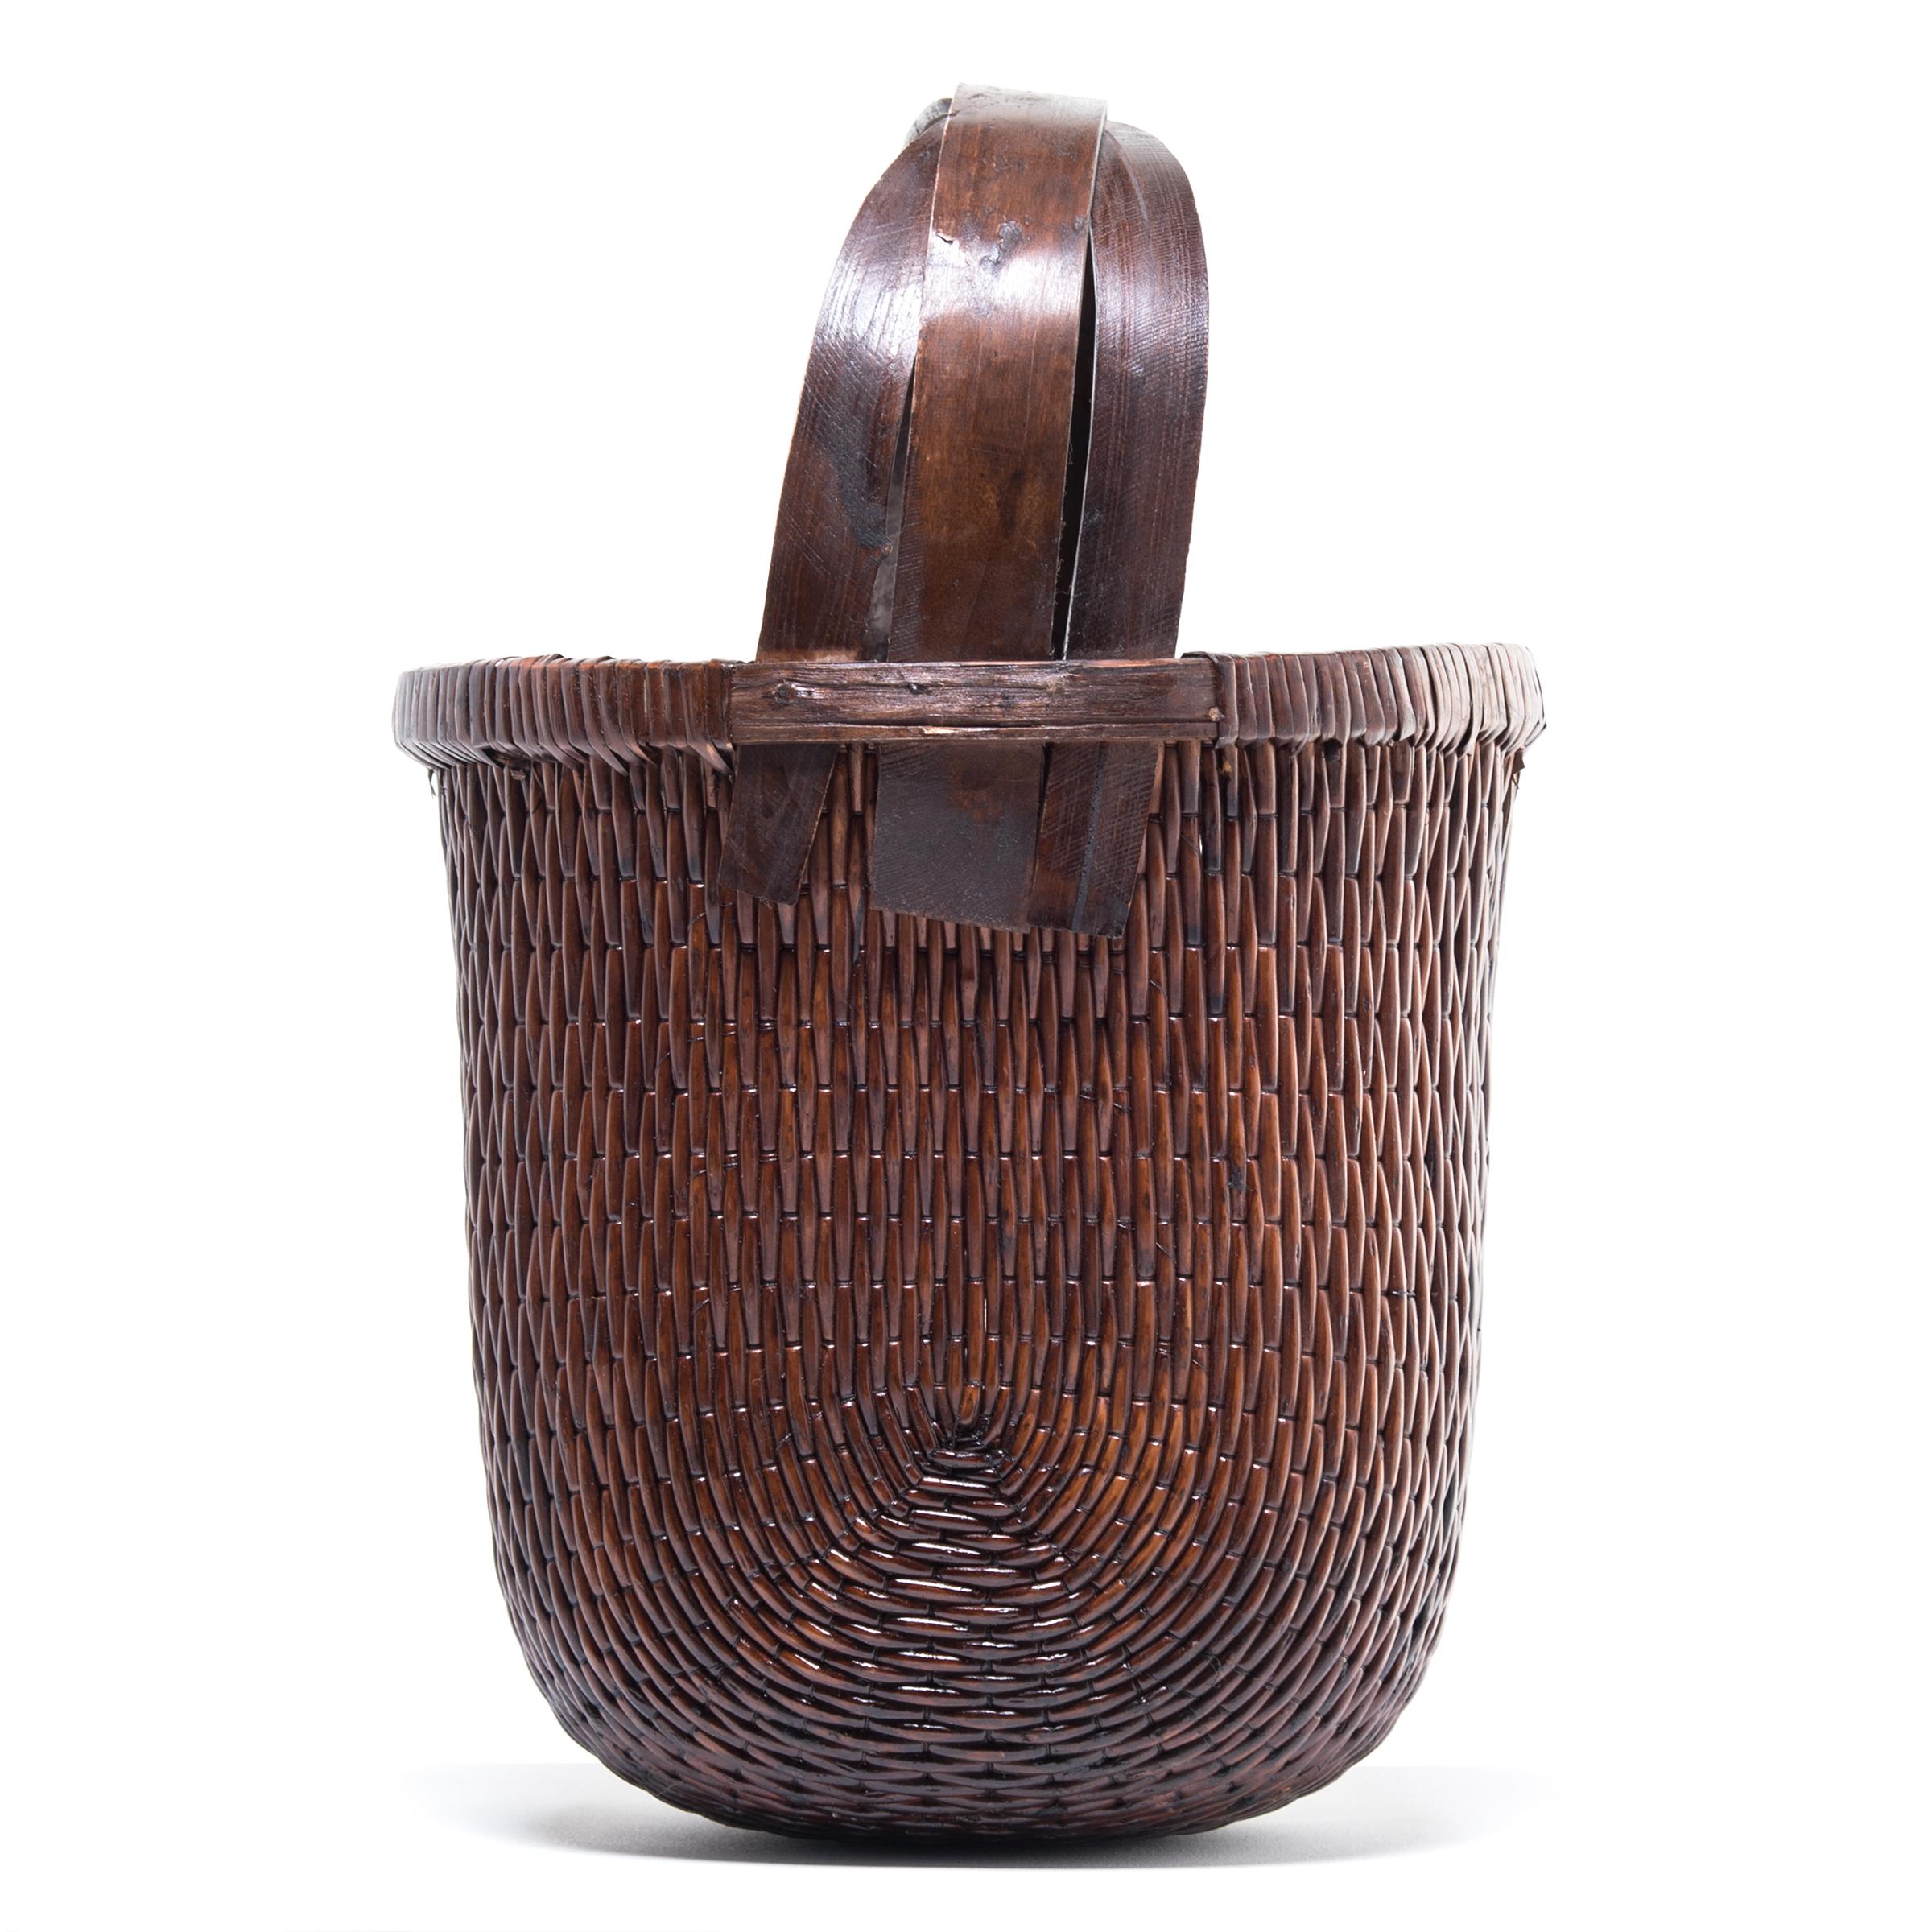 Hand-Woven Chinese Bent Handle Willow Basket, circa 1900